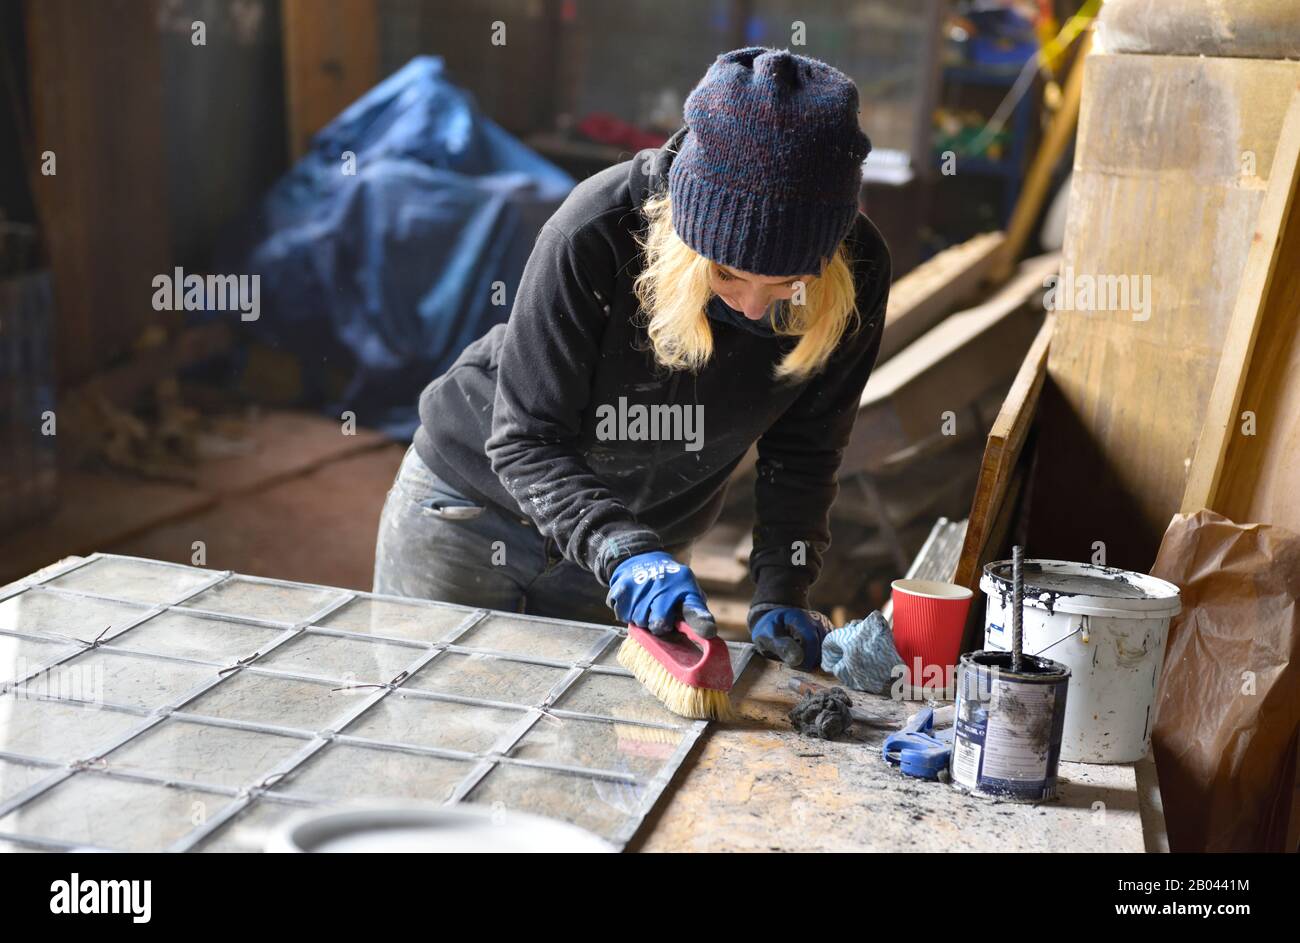 Woman stained glass working cleaning panel of clear glass on old building restoration. Working on site. Stock Photo